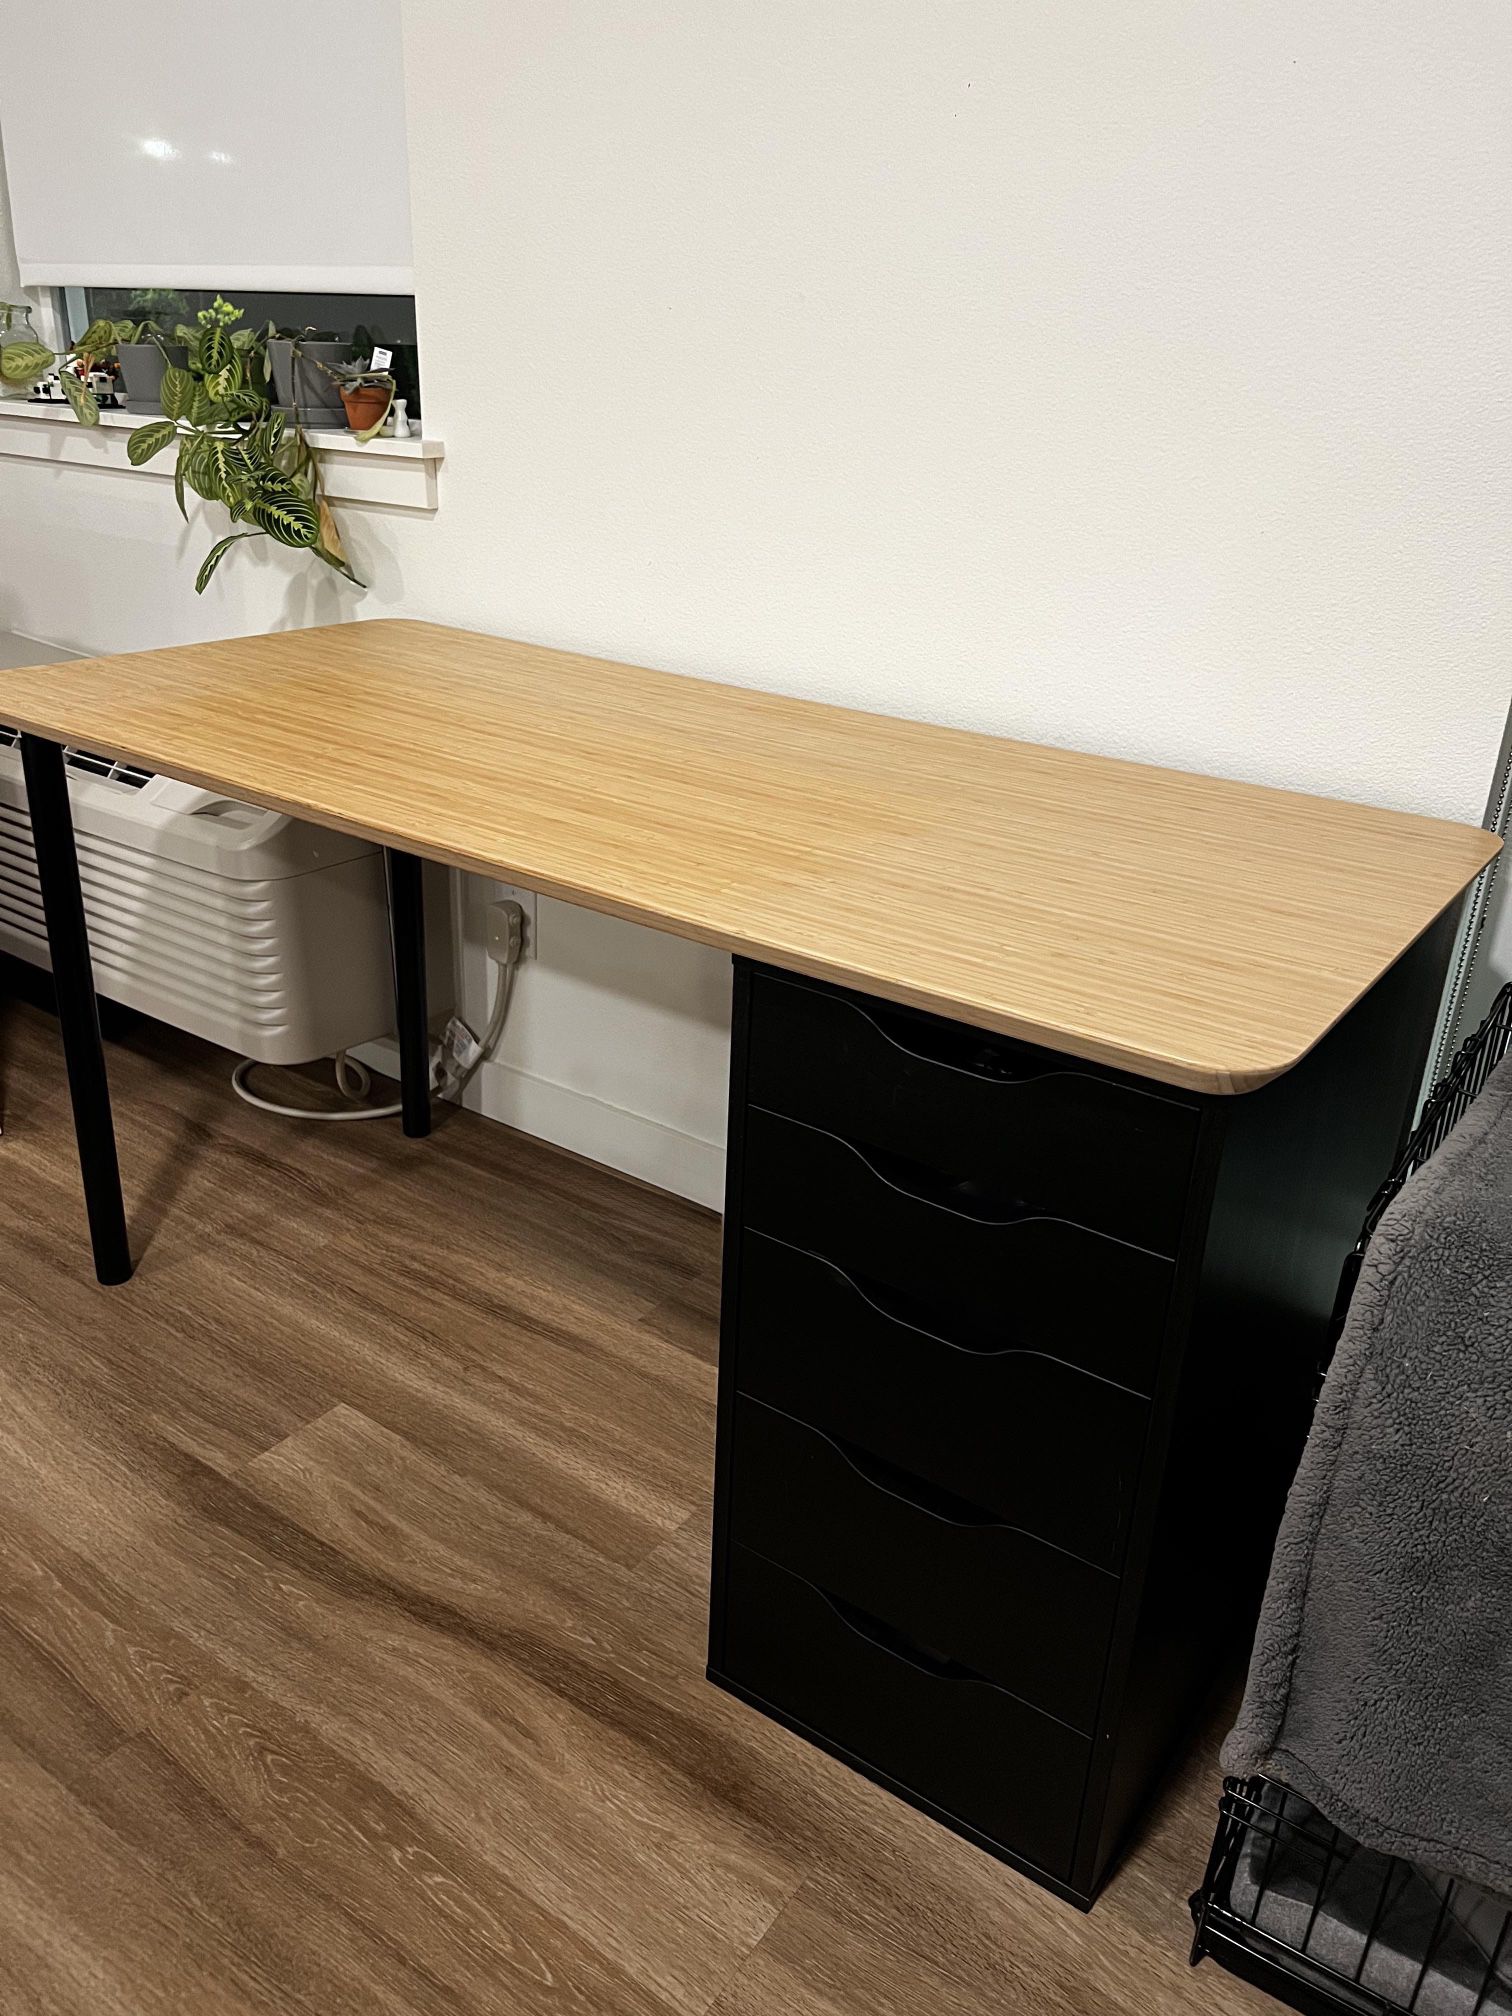 55x25” IKEA Bamboo Desk With Alex Drawer